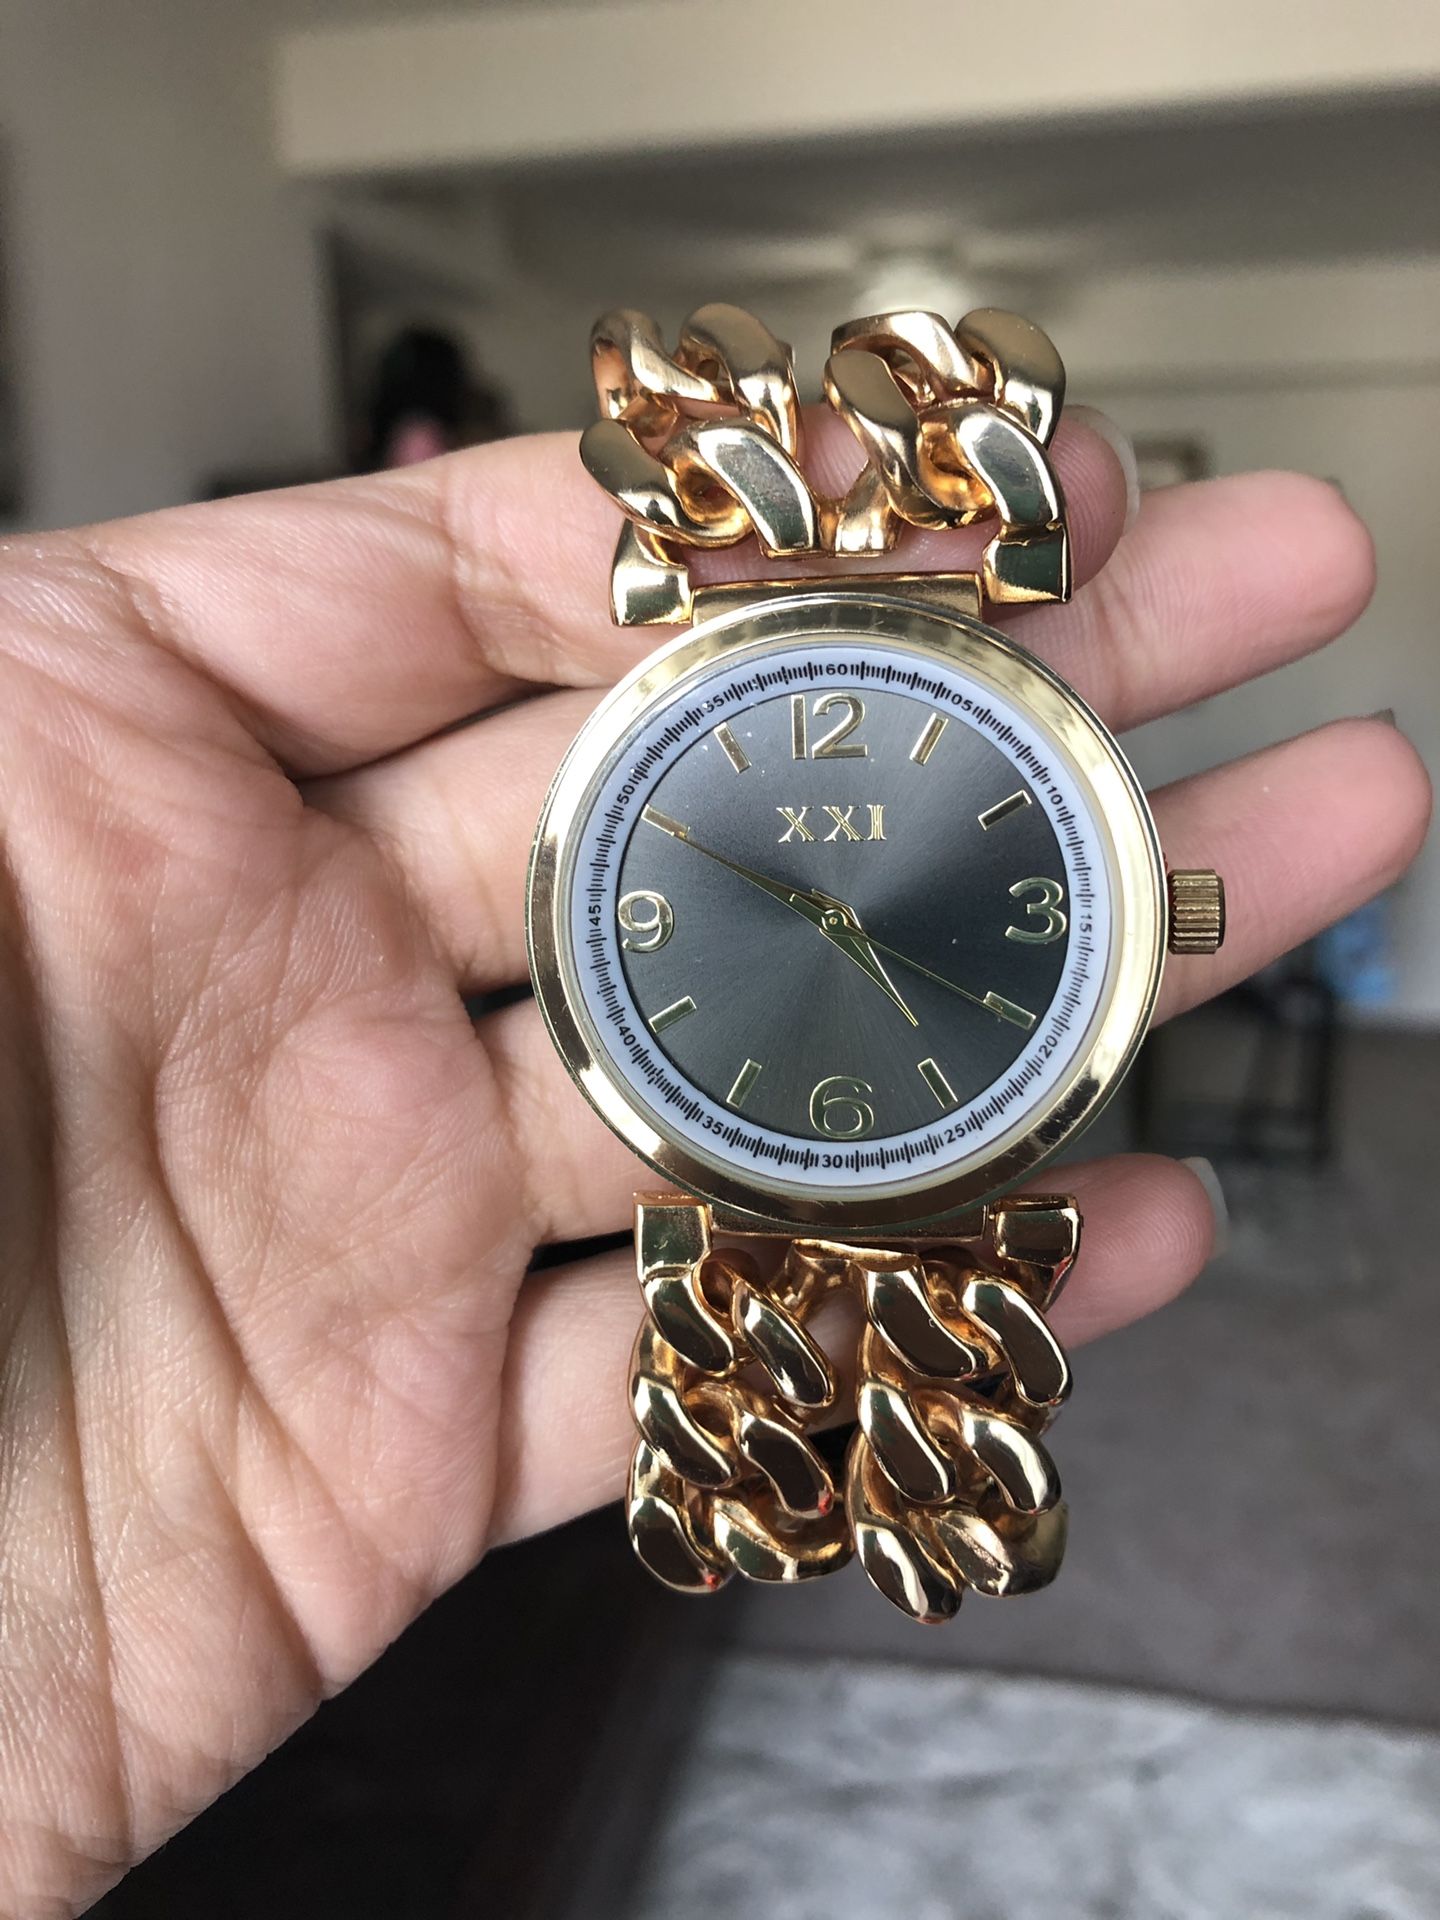 Forever 21 lady’s watch